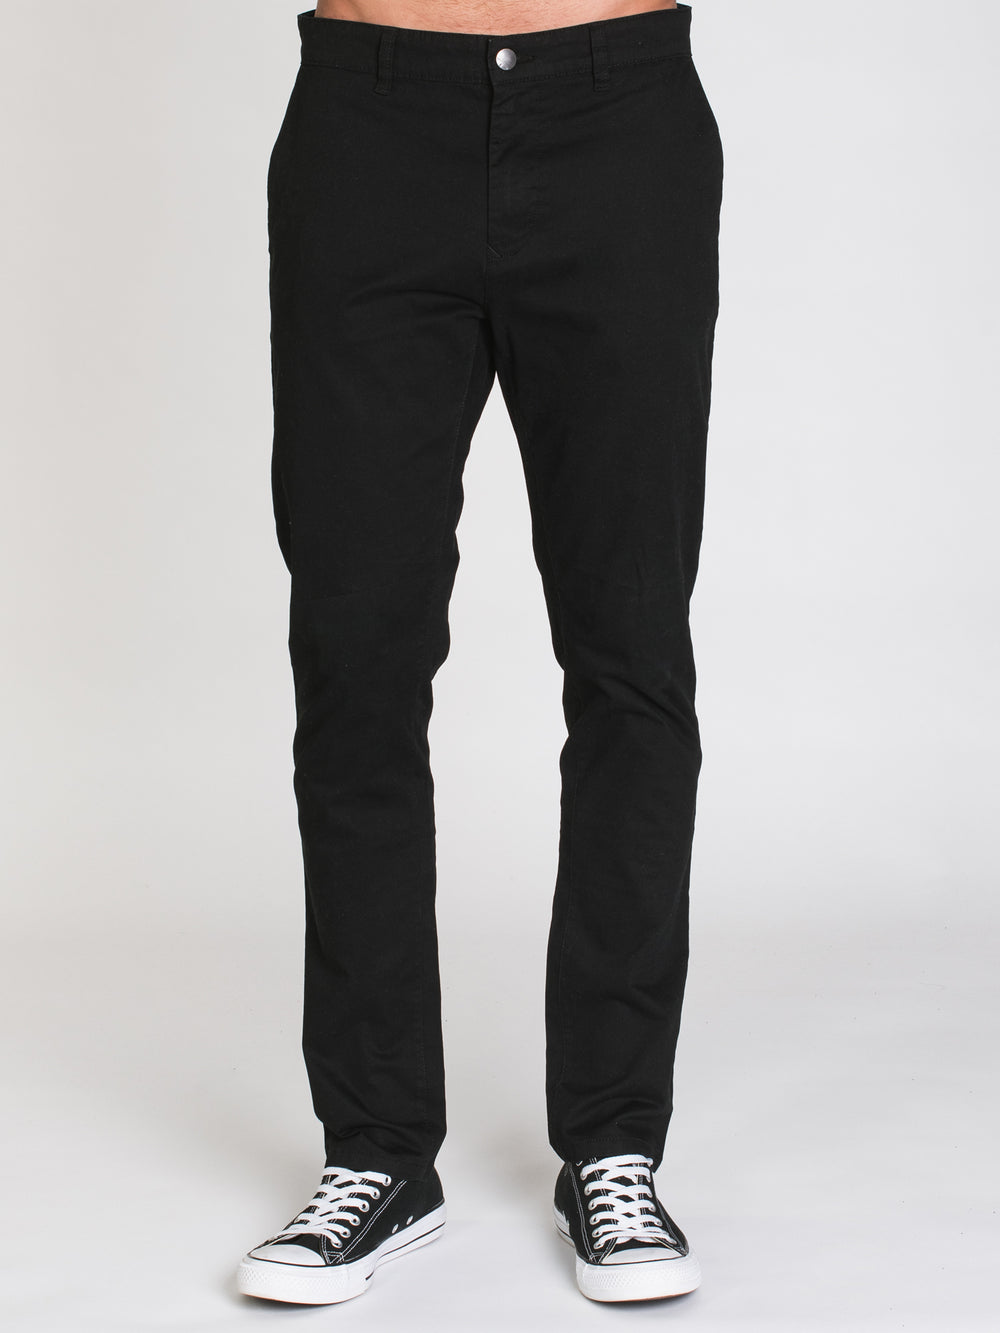 TAINTED SLIM CHINO - BLACK - CLEARANCE